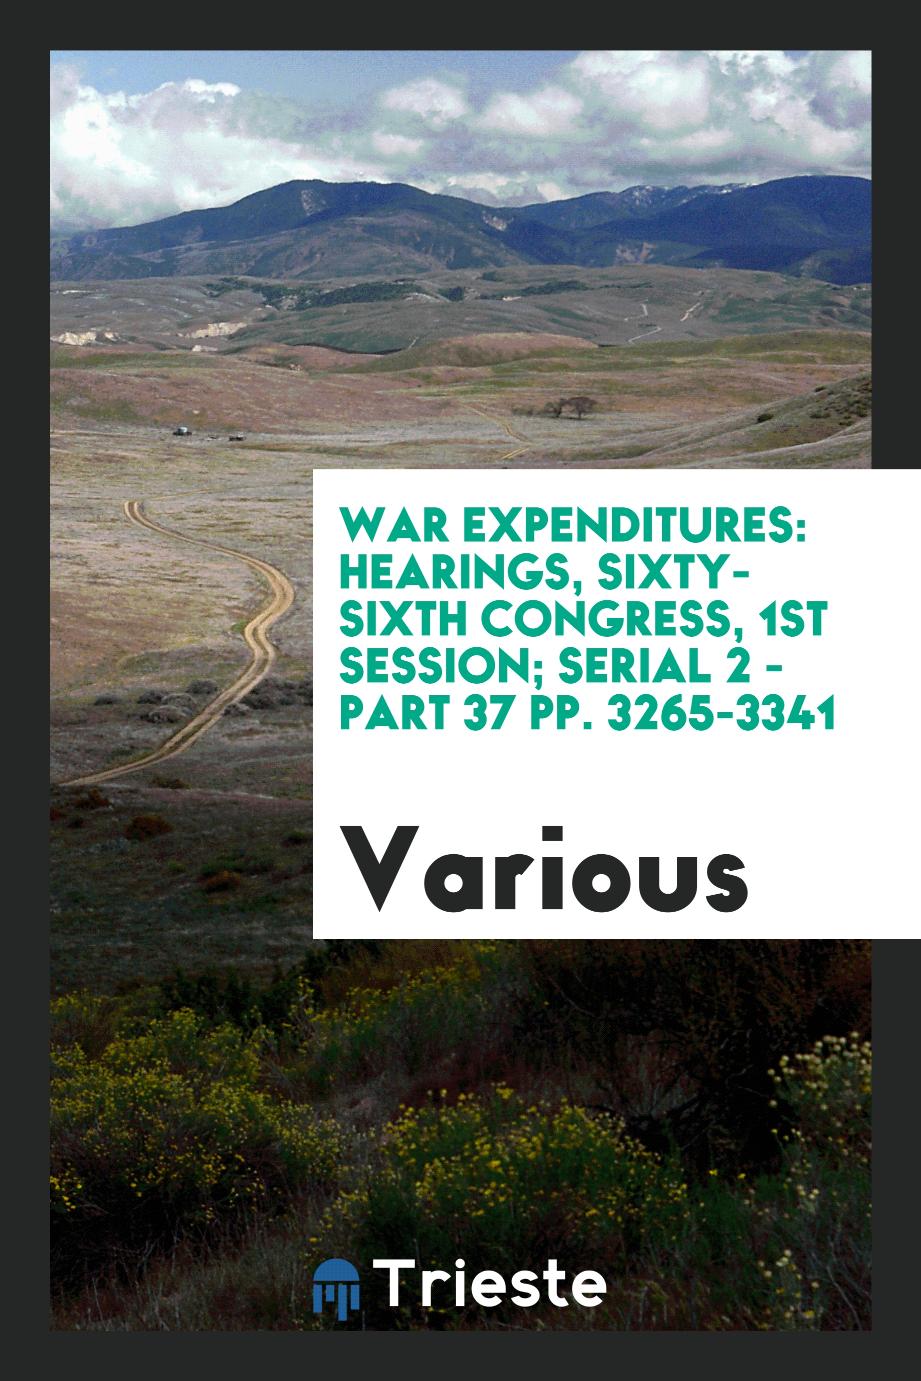 War Expenditures: Hearings, Sixty-sixth Congress, 1st Session; Serial 2 - Part 37 pp. 3265-3341